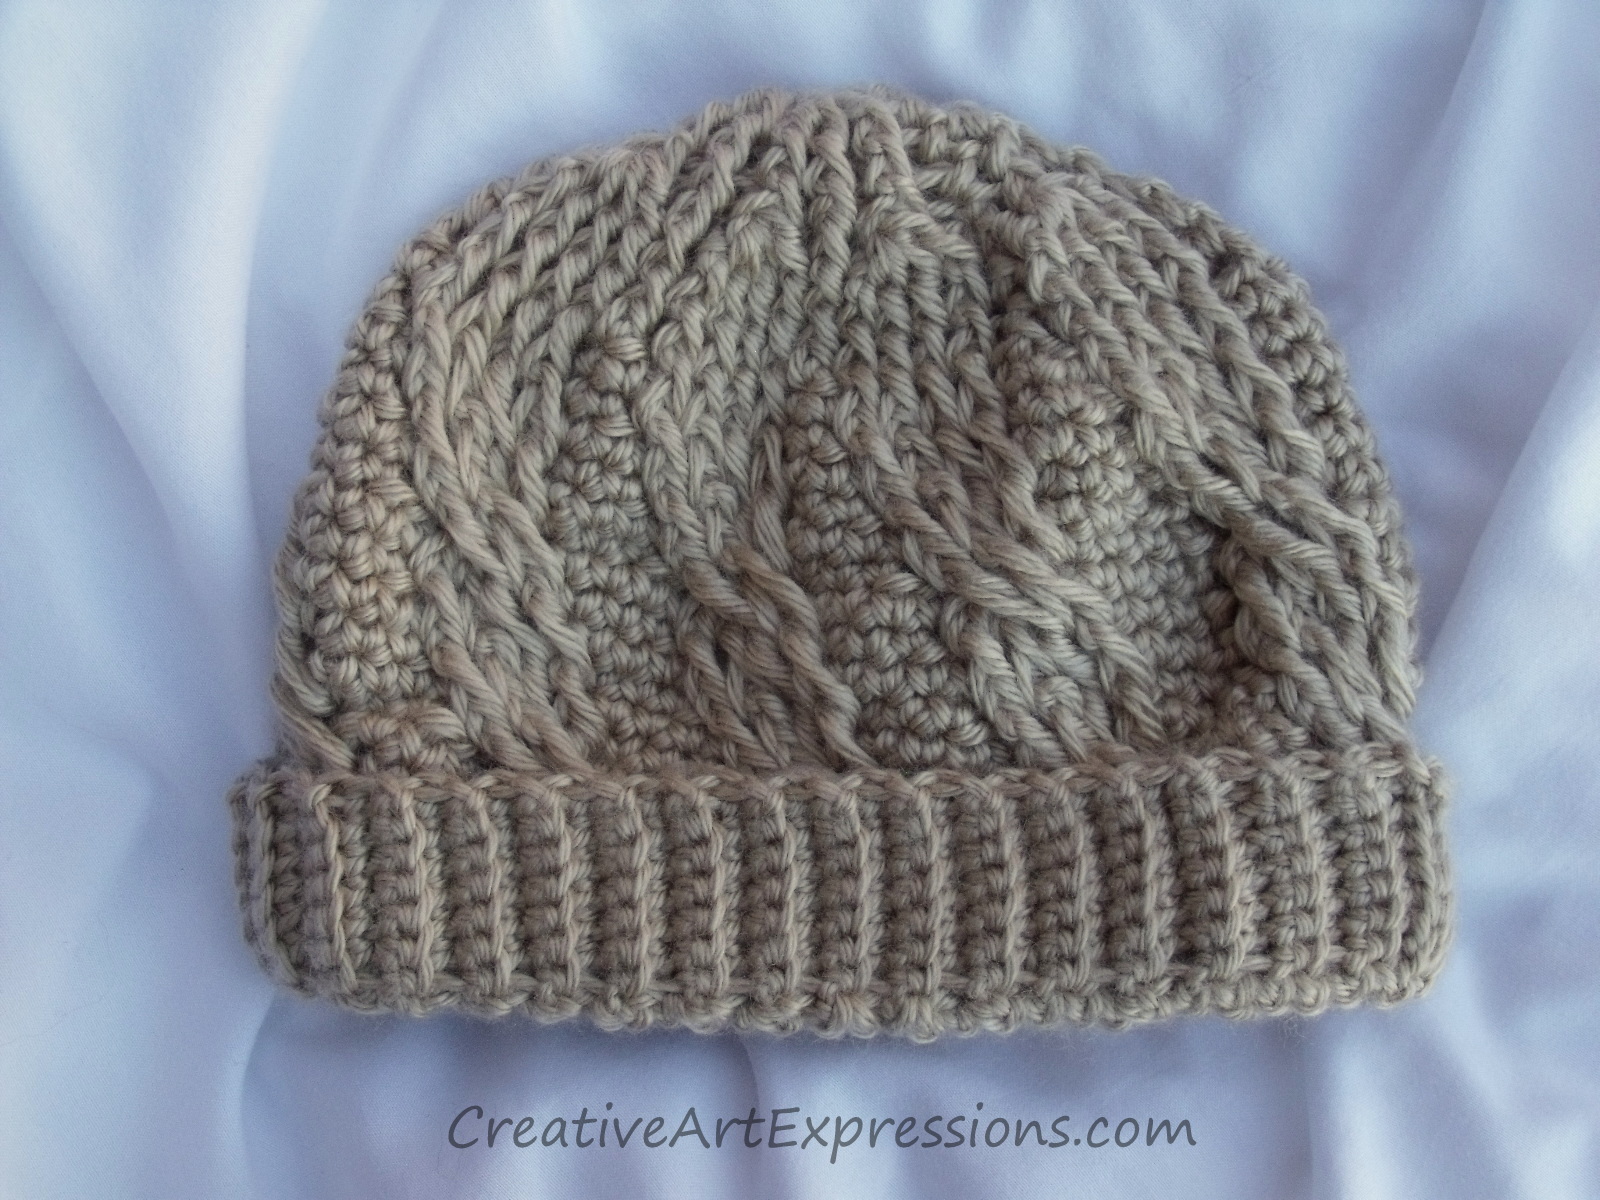 Hand Crocheted Cable Stitch Baby Beanie